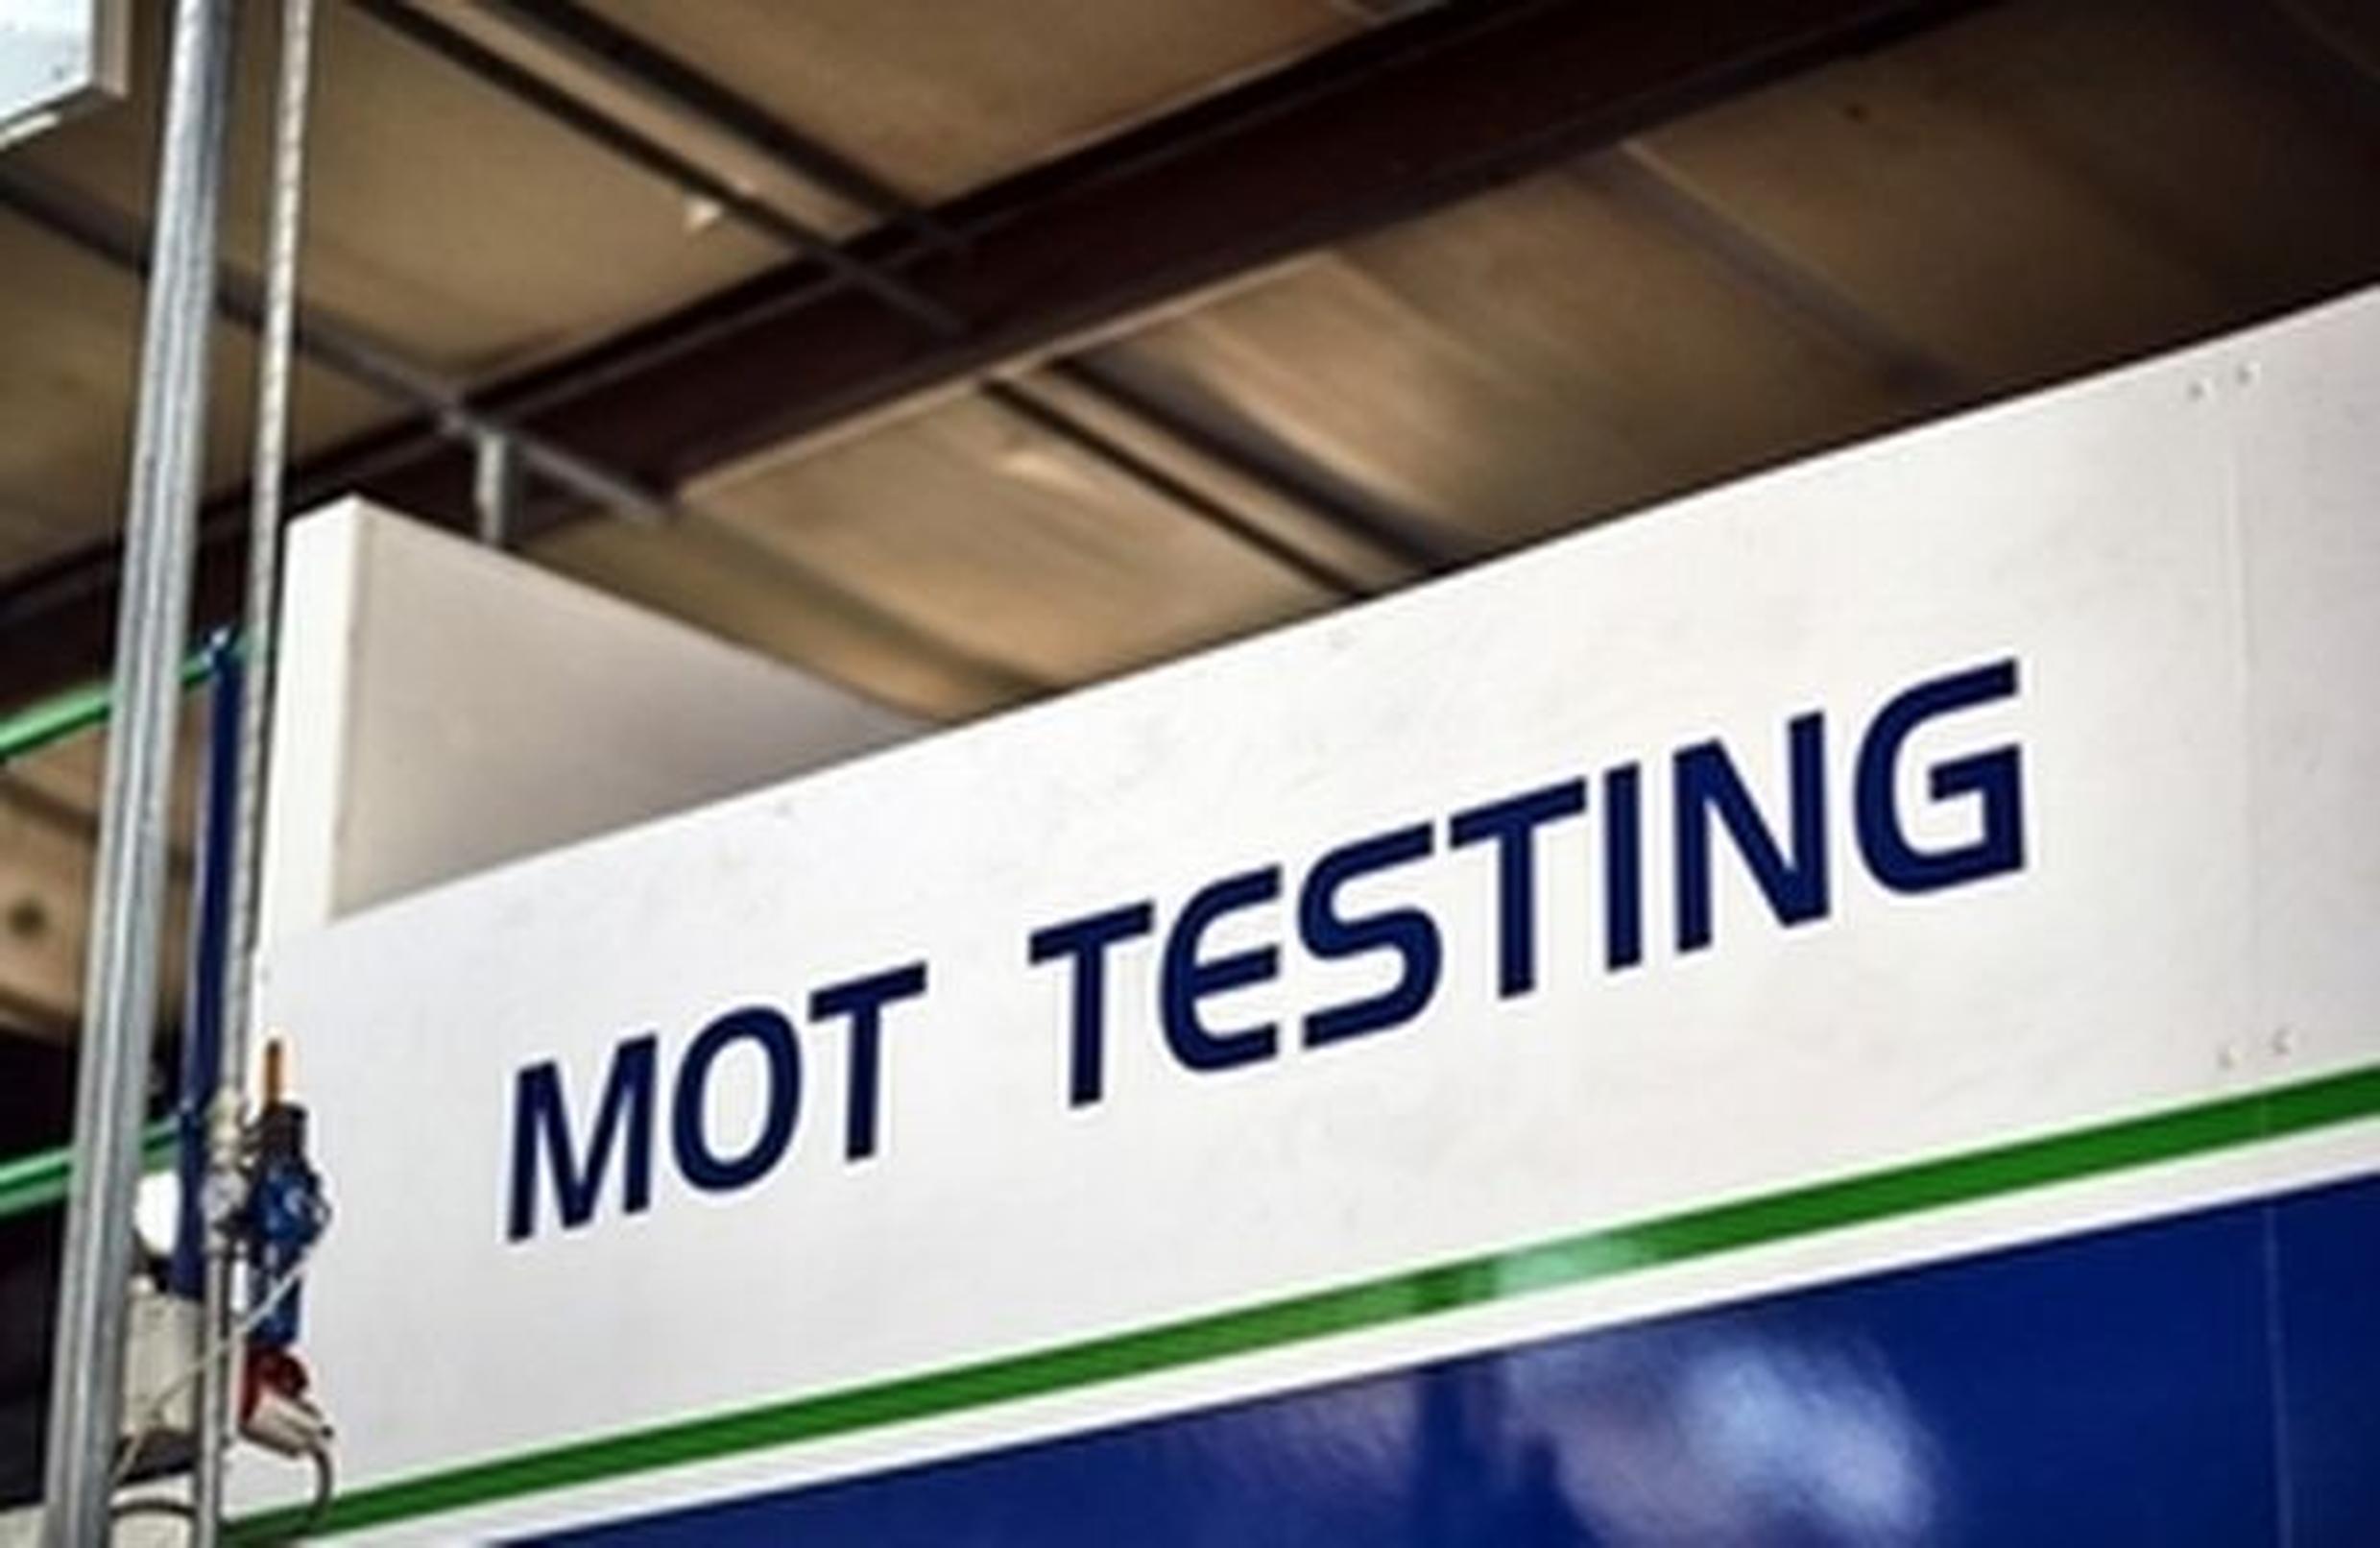 The DfT says data shows that most new vehicles pass the first MOT test at three years